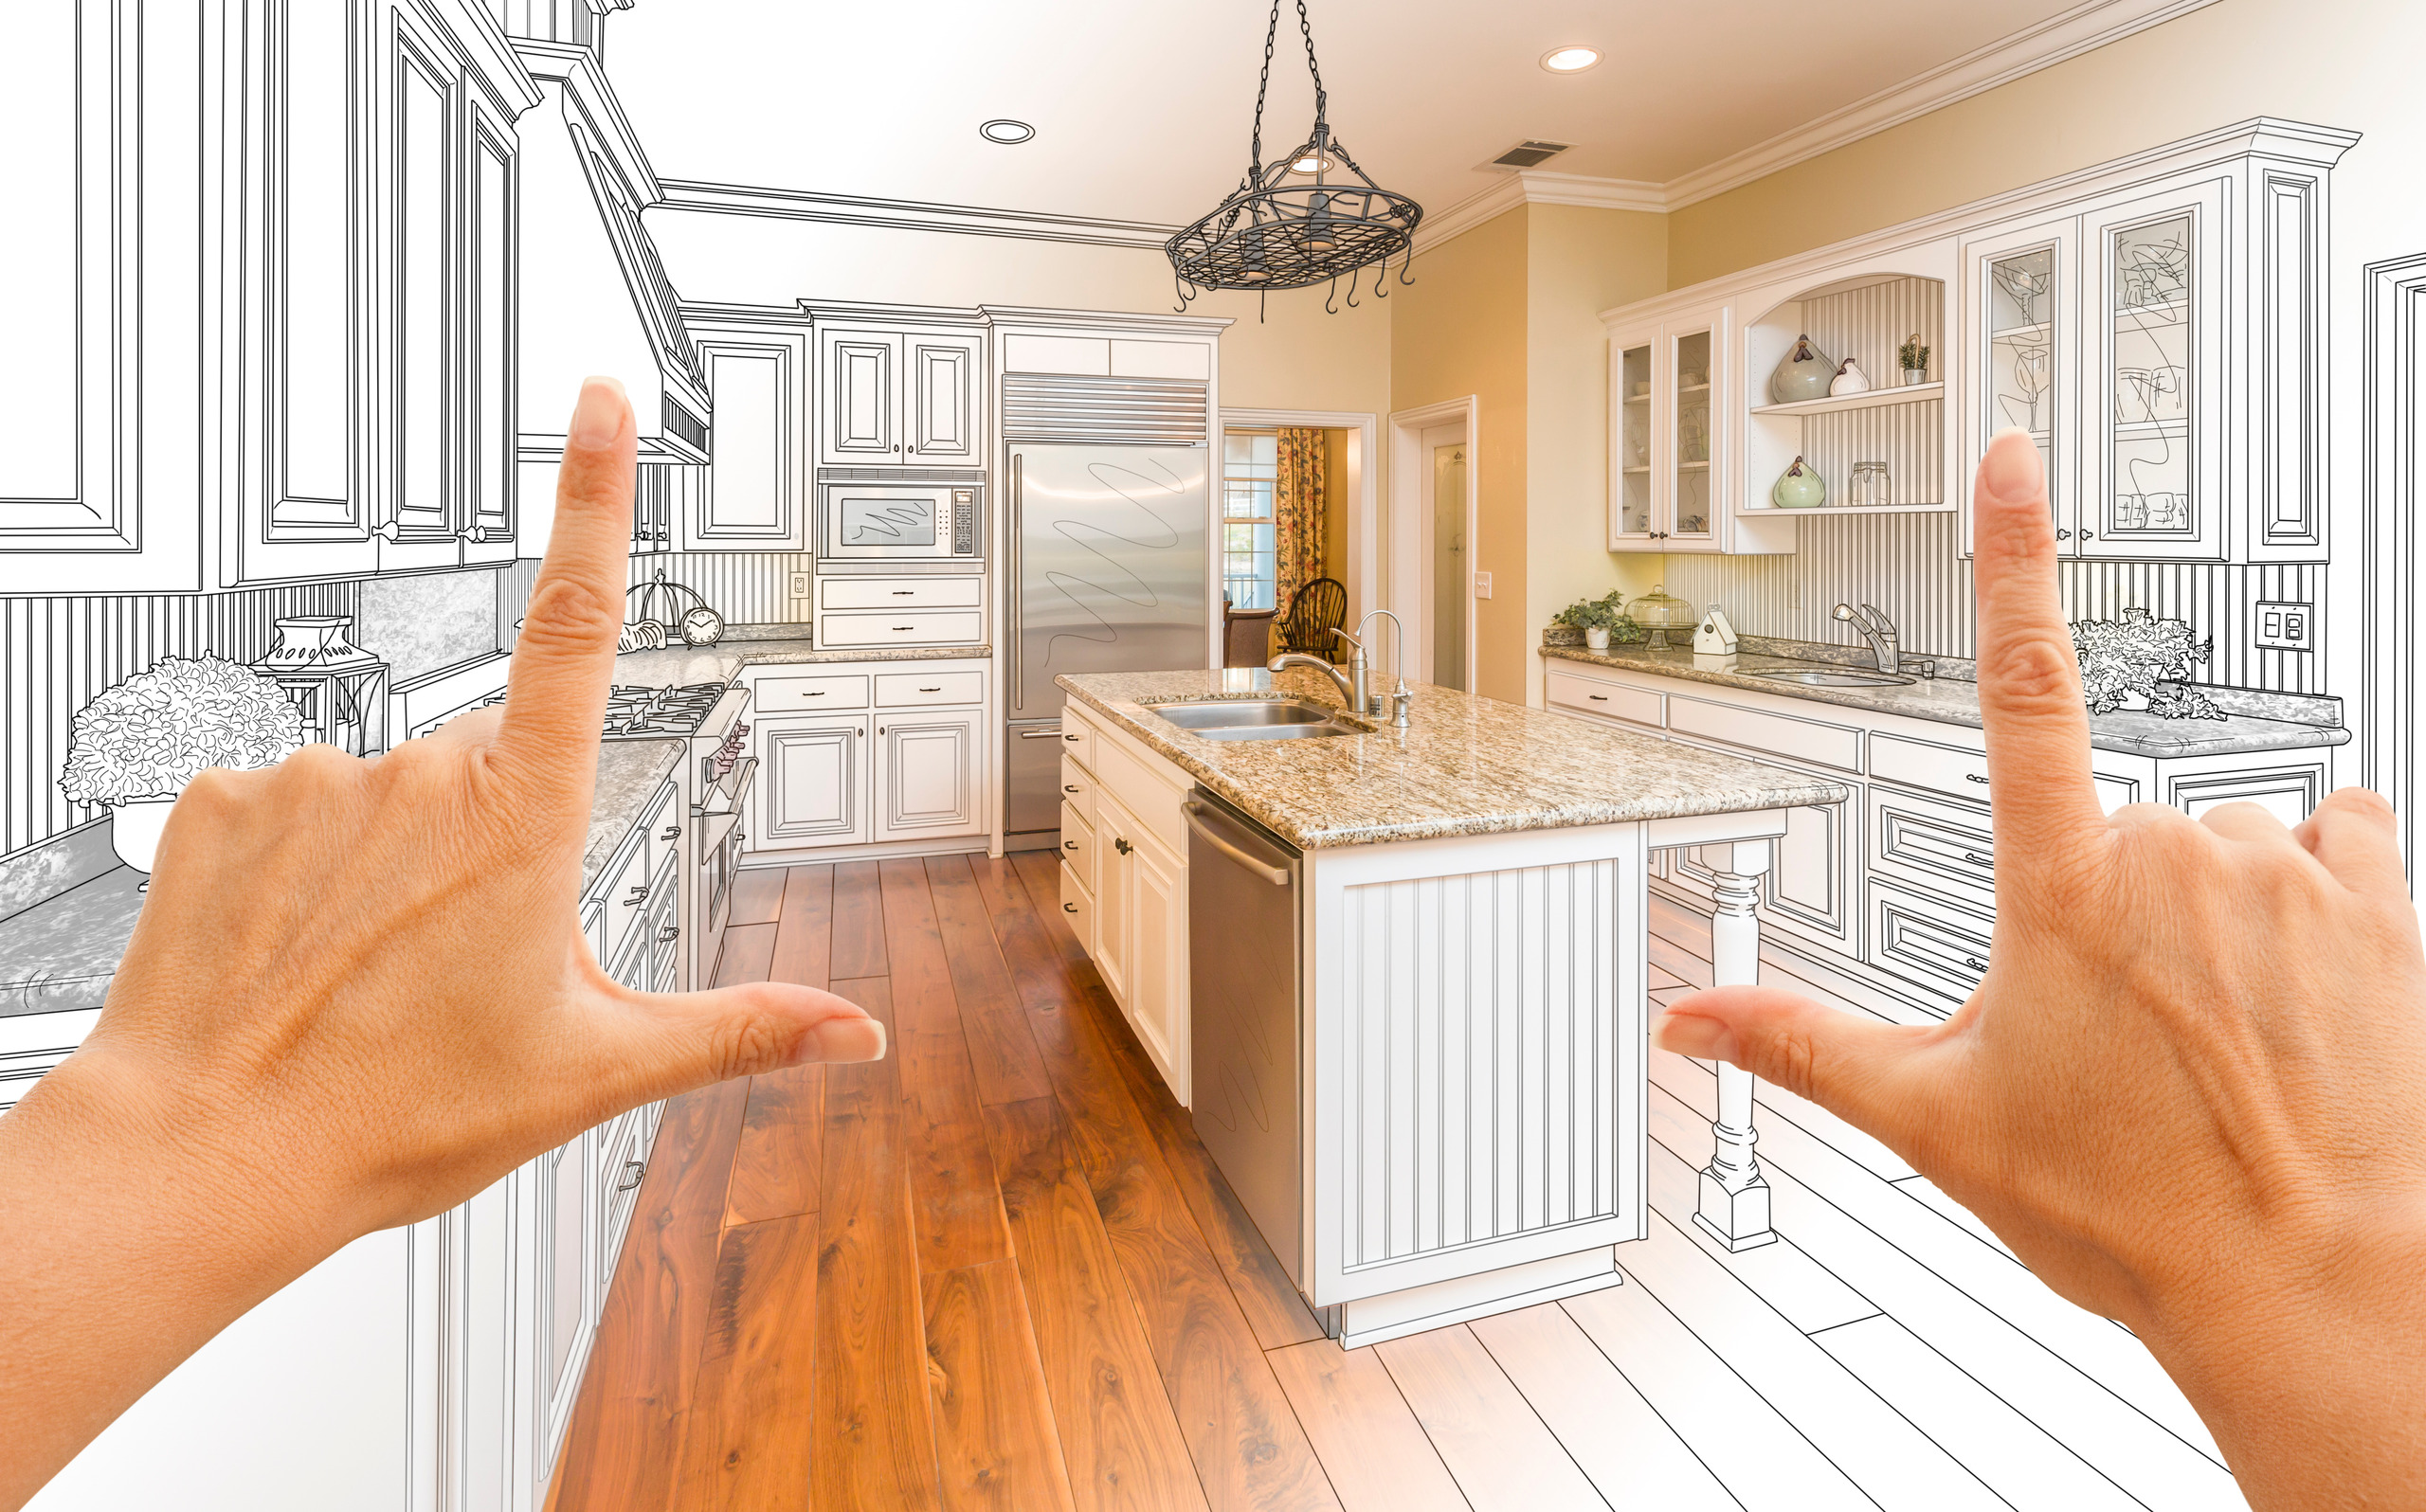 A person uses their hands to frame a kitchen. Elements of the kitchen are black and white blueprints/drawings while other elements, like the kitchen island, are real.